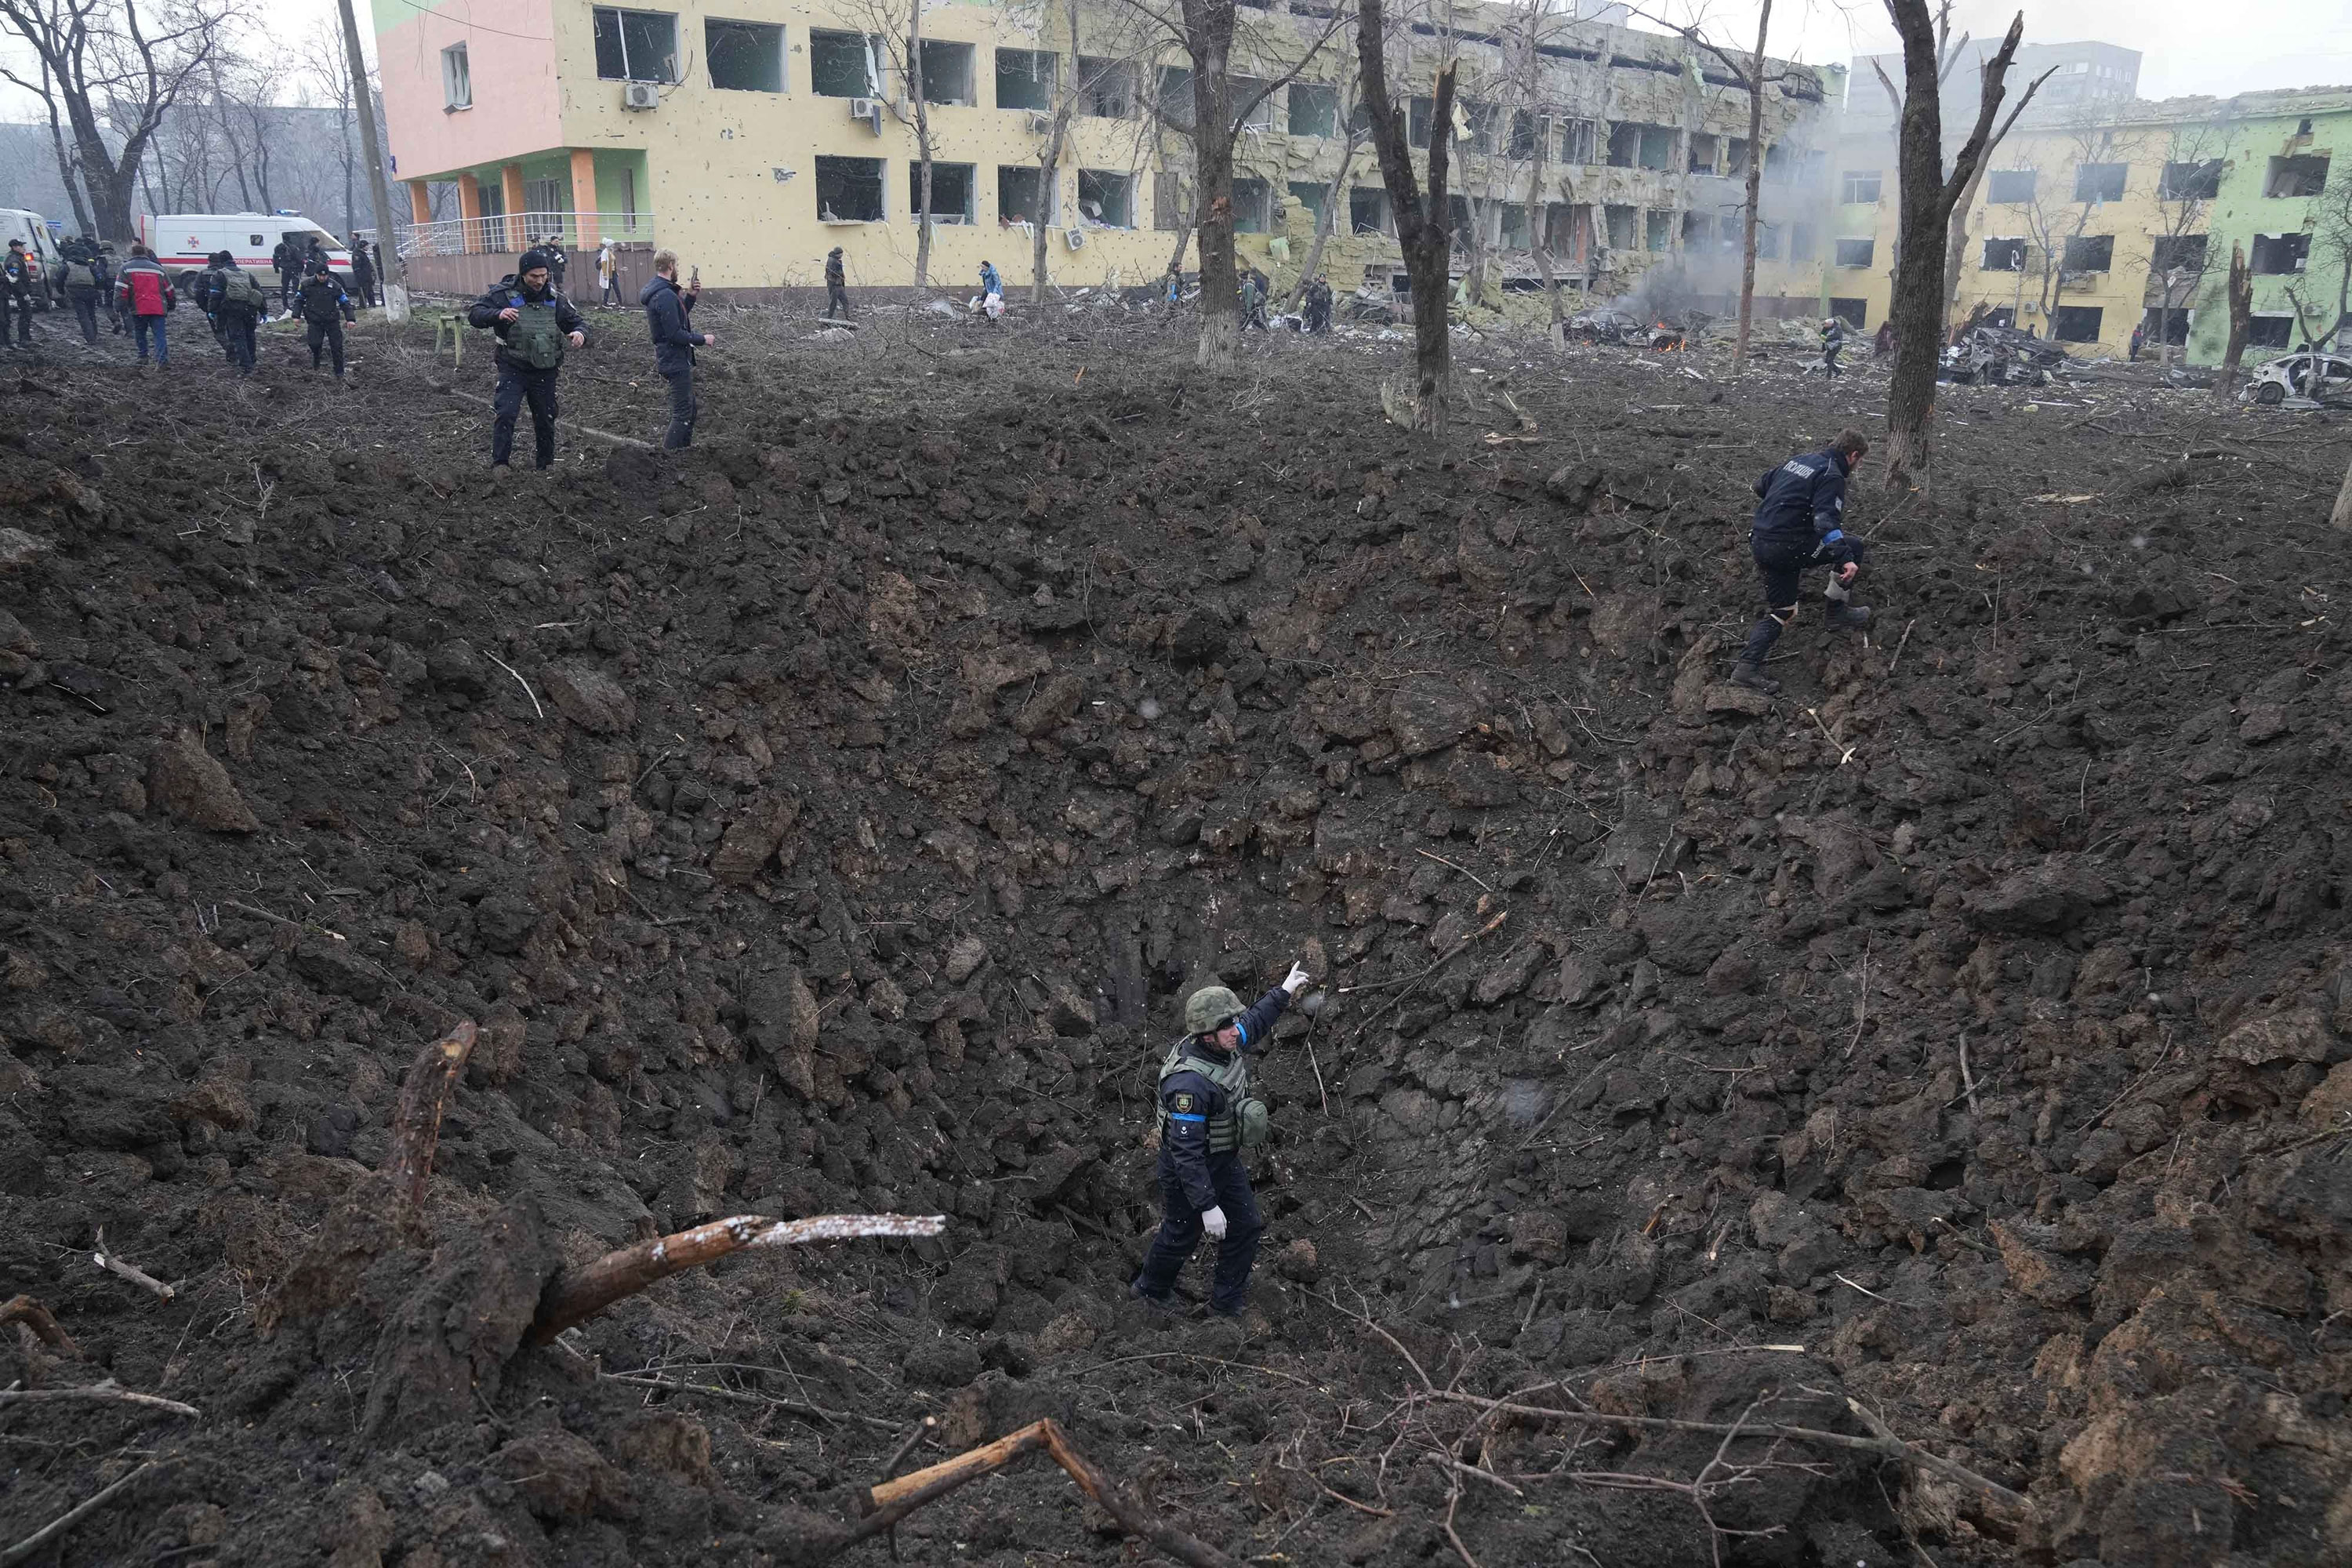 Ukrainian soldiers and emergency personnel work at the site of the shelling.